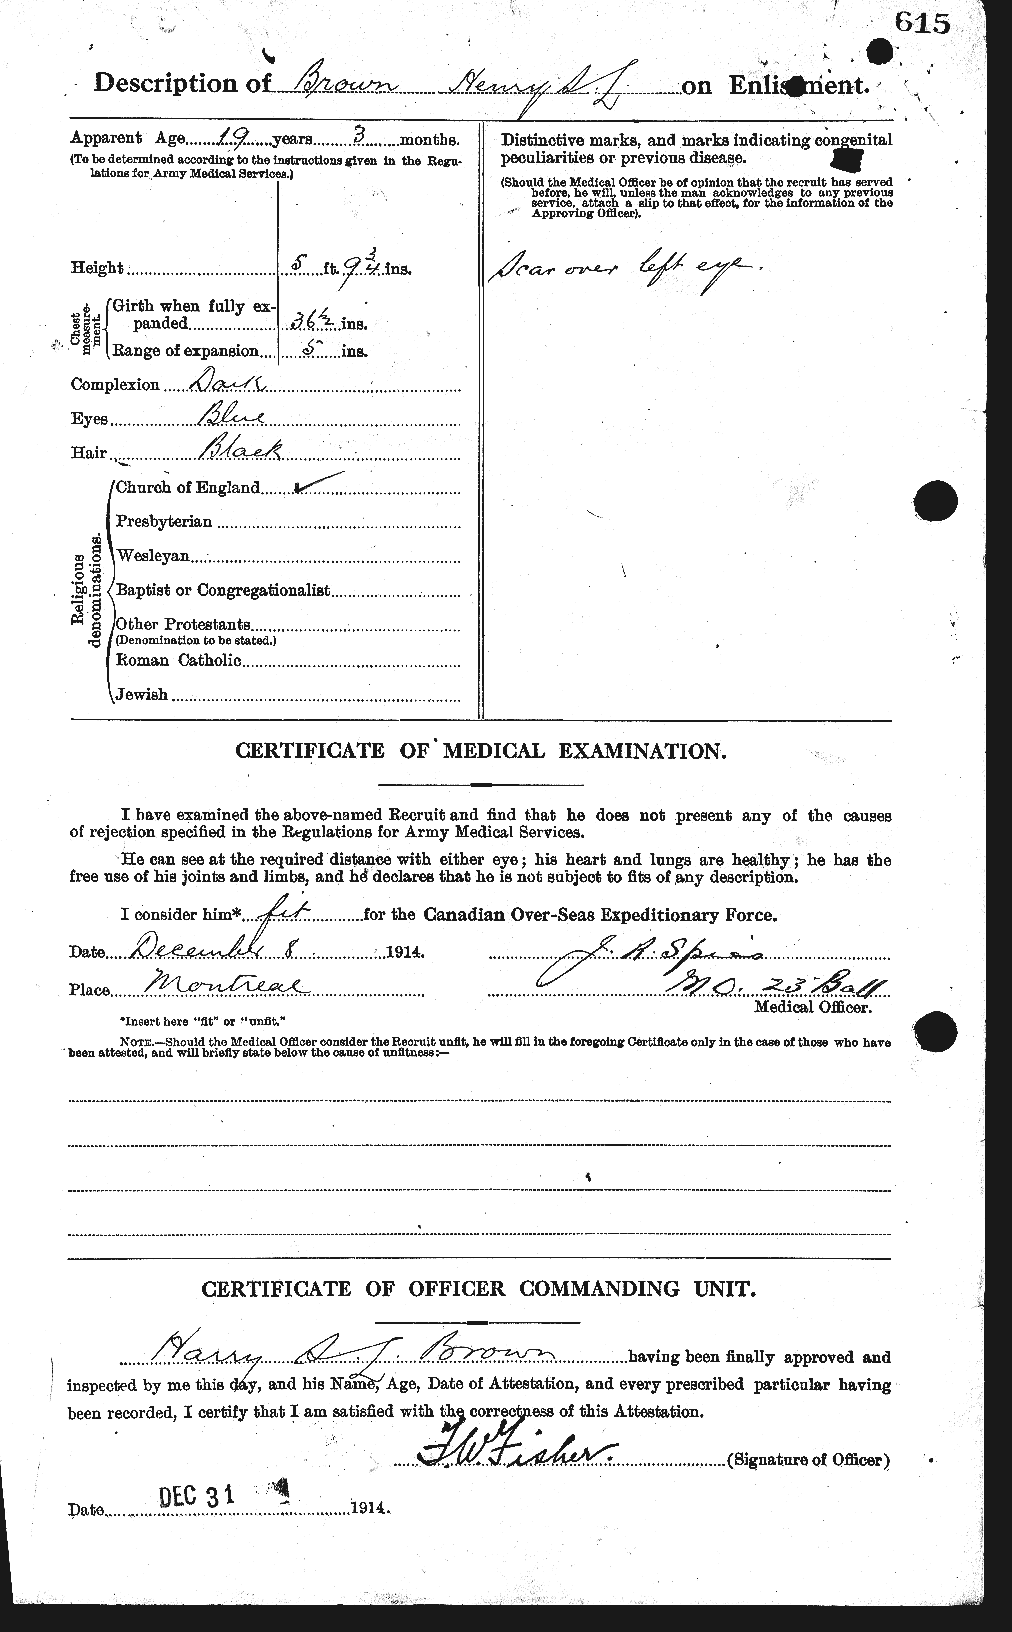 Personnel Records of the First World War - CEF 265538b